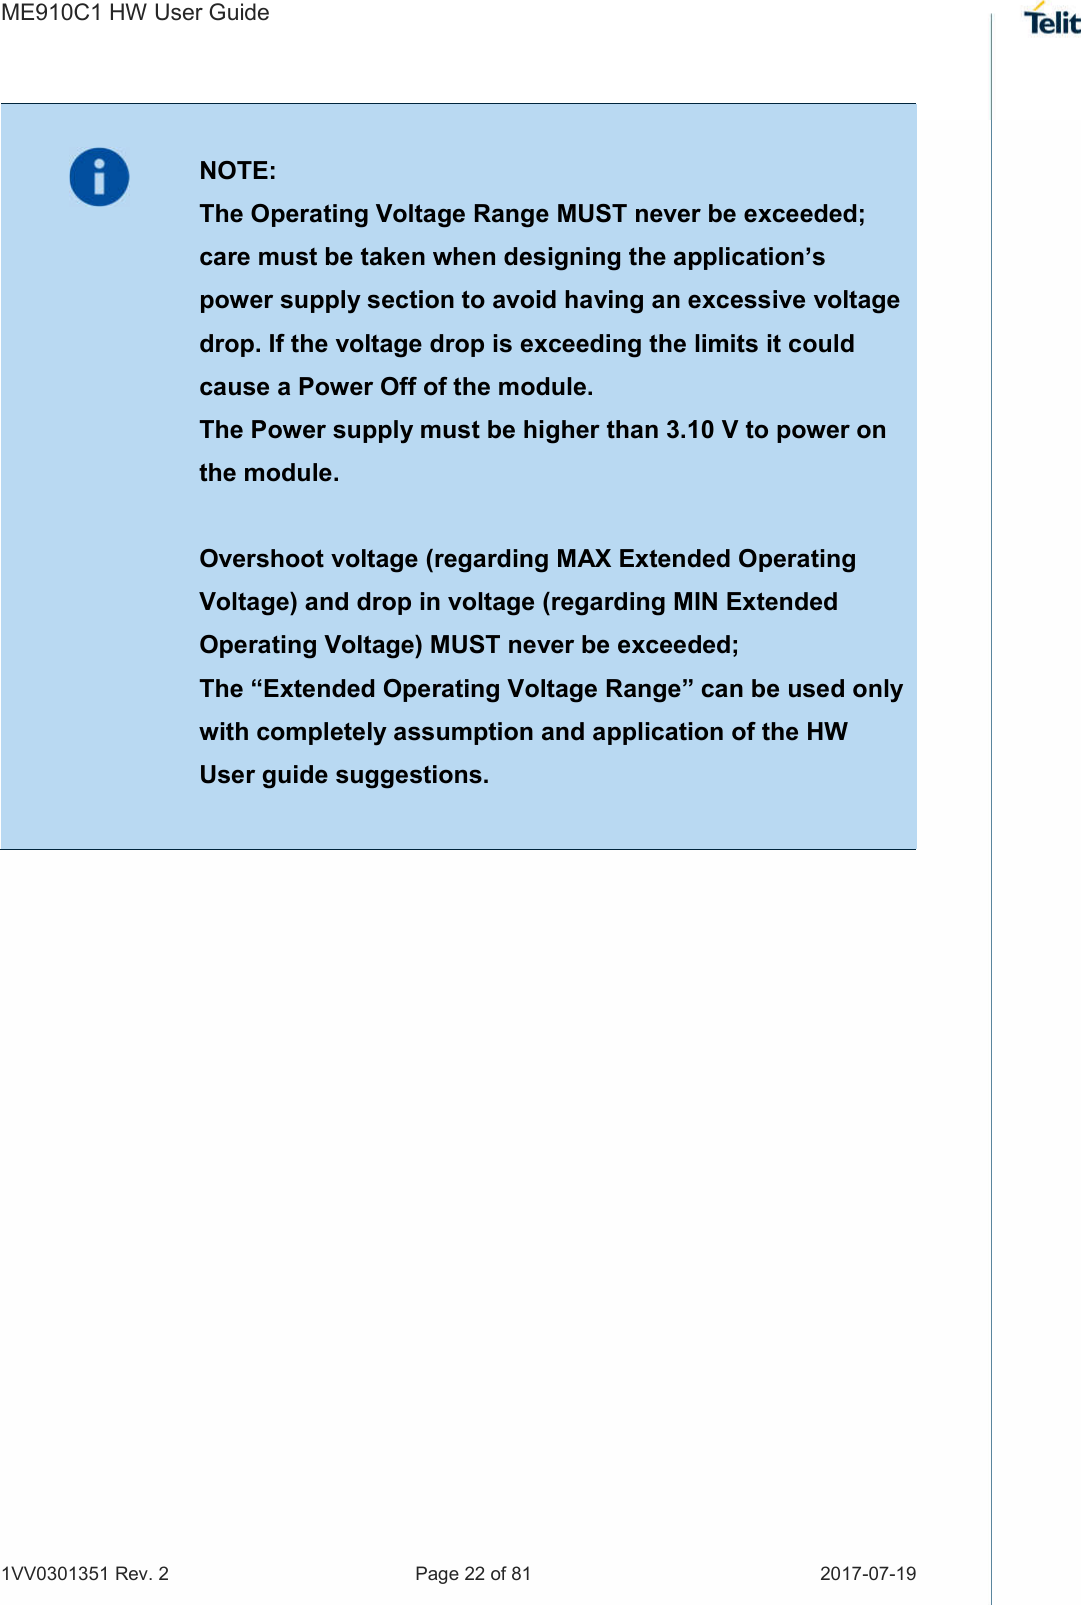 ME910C1 HW User Guide 1VV0301351 Rev. 2  Page 22 of 81  2017-07-19     NOTE: The Operating Voltage Range MUST never be exceeded; care must be taken when designing the application’s power supply section to avoid having an excessive voltage drop. If the voltage drop is exceeding the limits it could cause a Power Off of the module. The Power supply must be higher than 3.10 V to power on the module.  Overshoot voltage (regarding MAX Extended Operating Voltage) and drop in voltage (regarding MIN Extended Operating Voltage) MUST never be exceeded;  The “Extended Operating Voltage Range” can be used only with completely assumption and application of the HW User guide suggestions.     